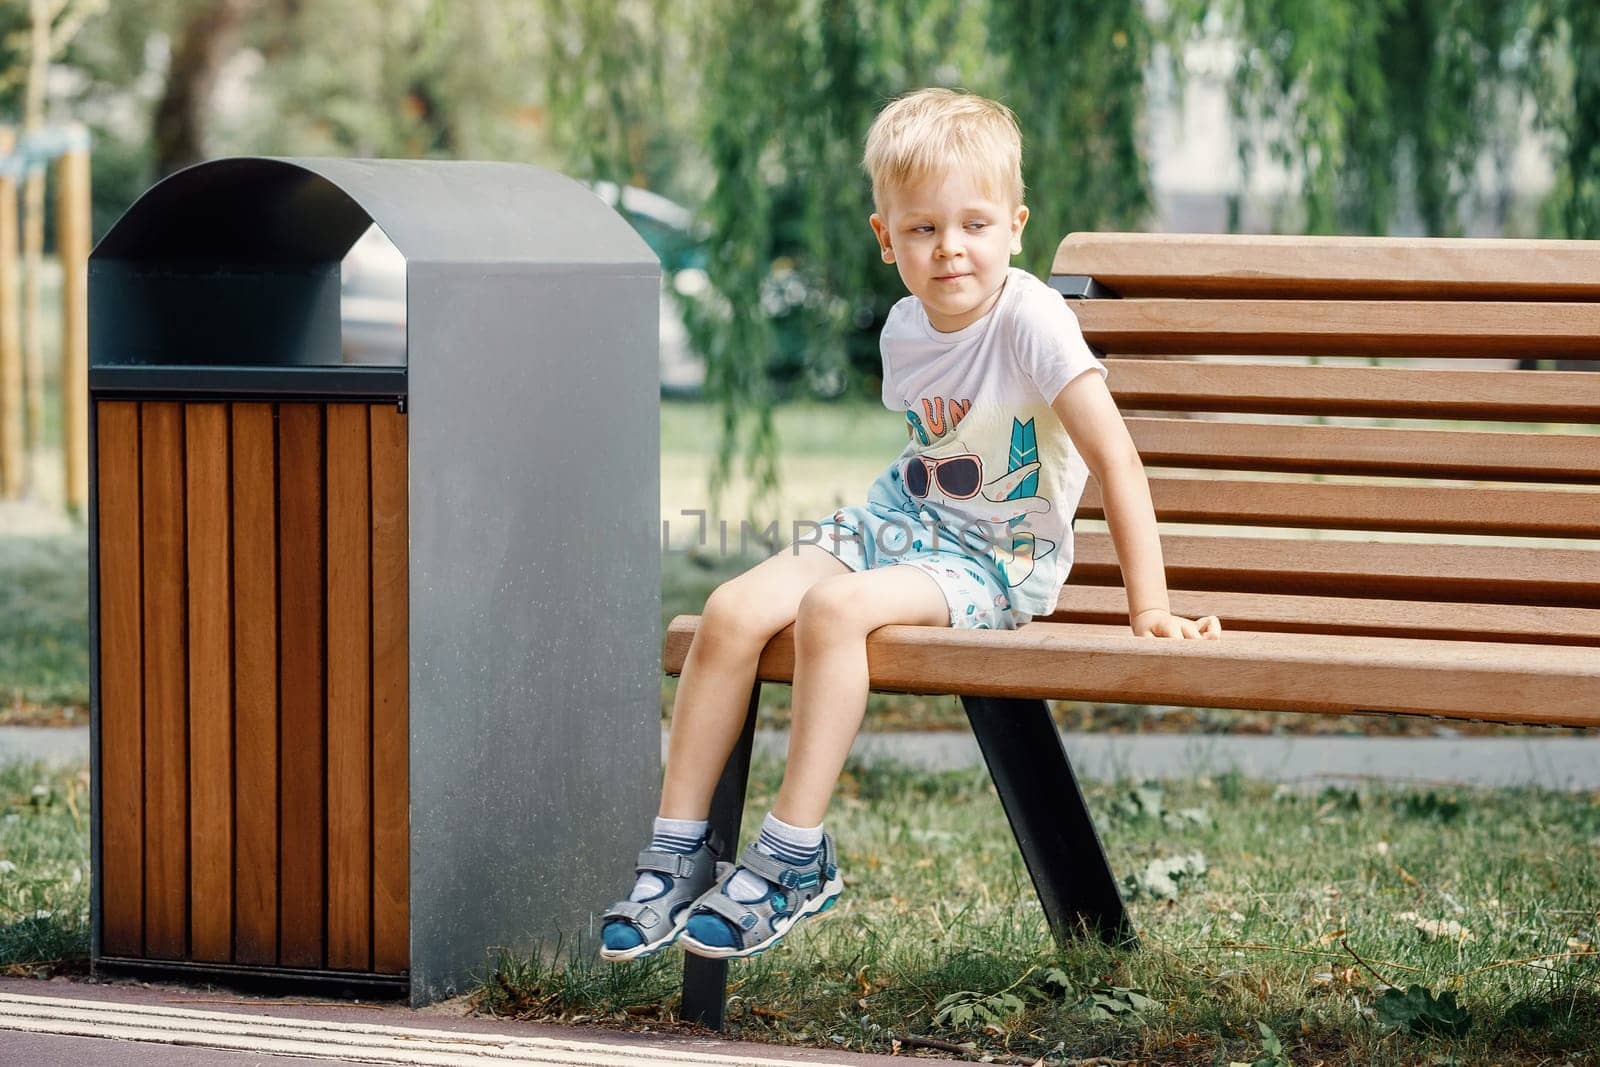 Child portrait sitting on a bench in park, white haired boy 3 years old. Beautiful bench and trash can with a modern design.